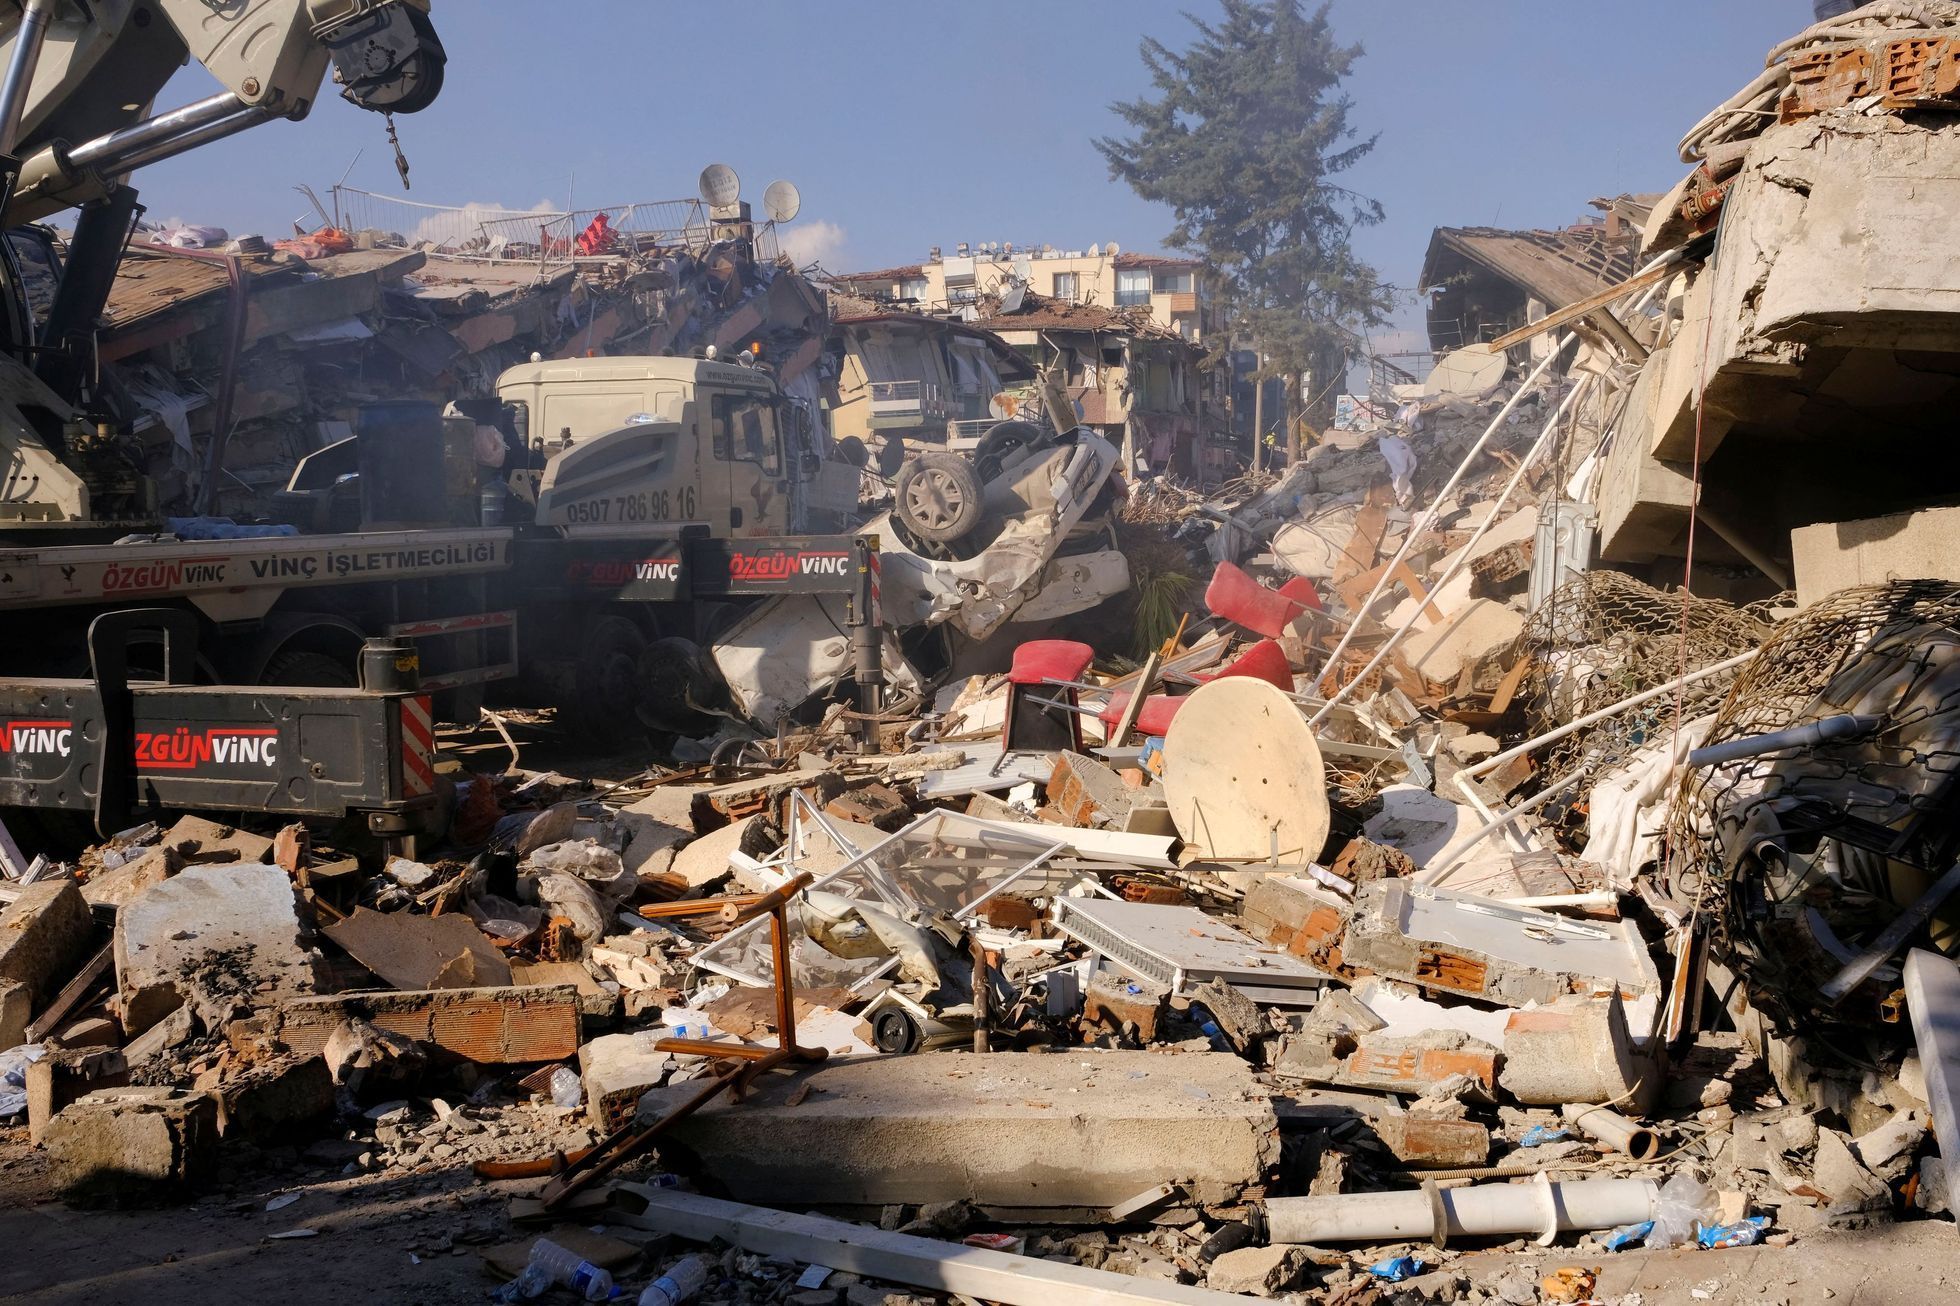 Demolished buildings are seen in the aftermath of an earthquake in Hatay, Turkey